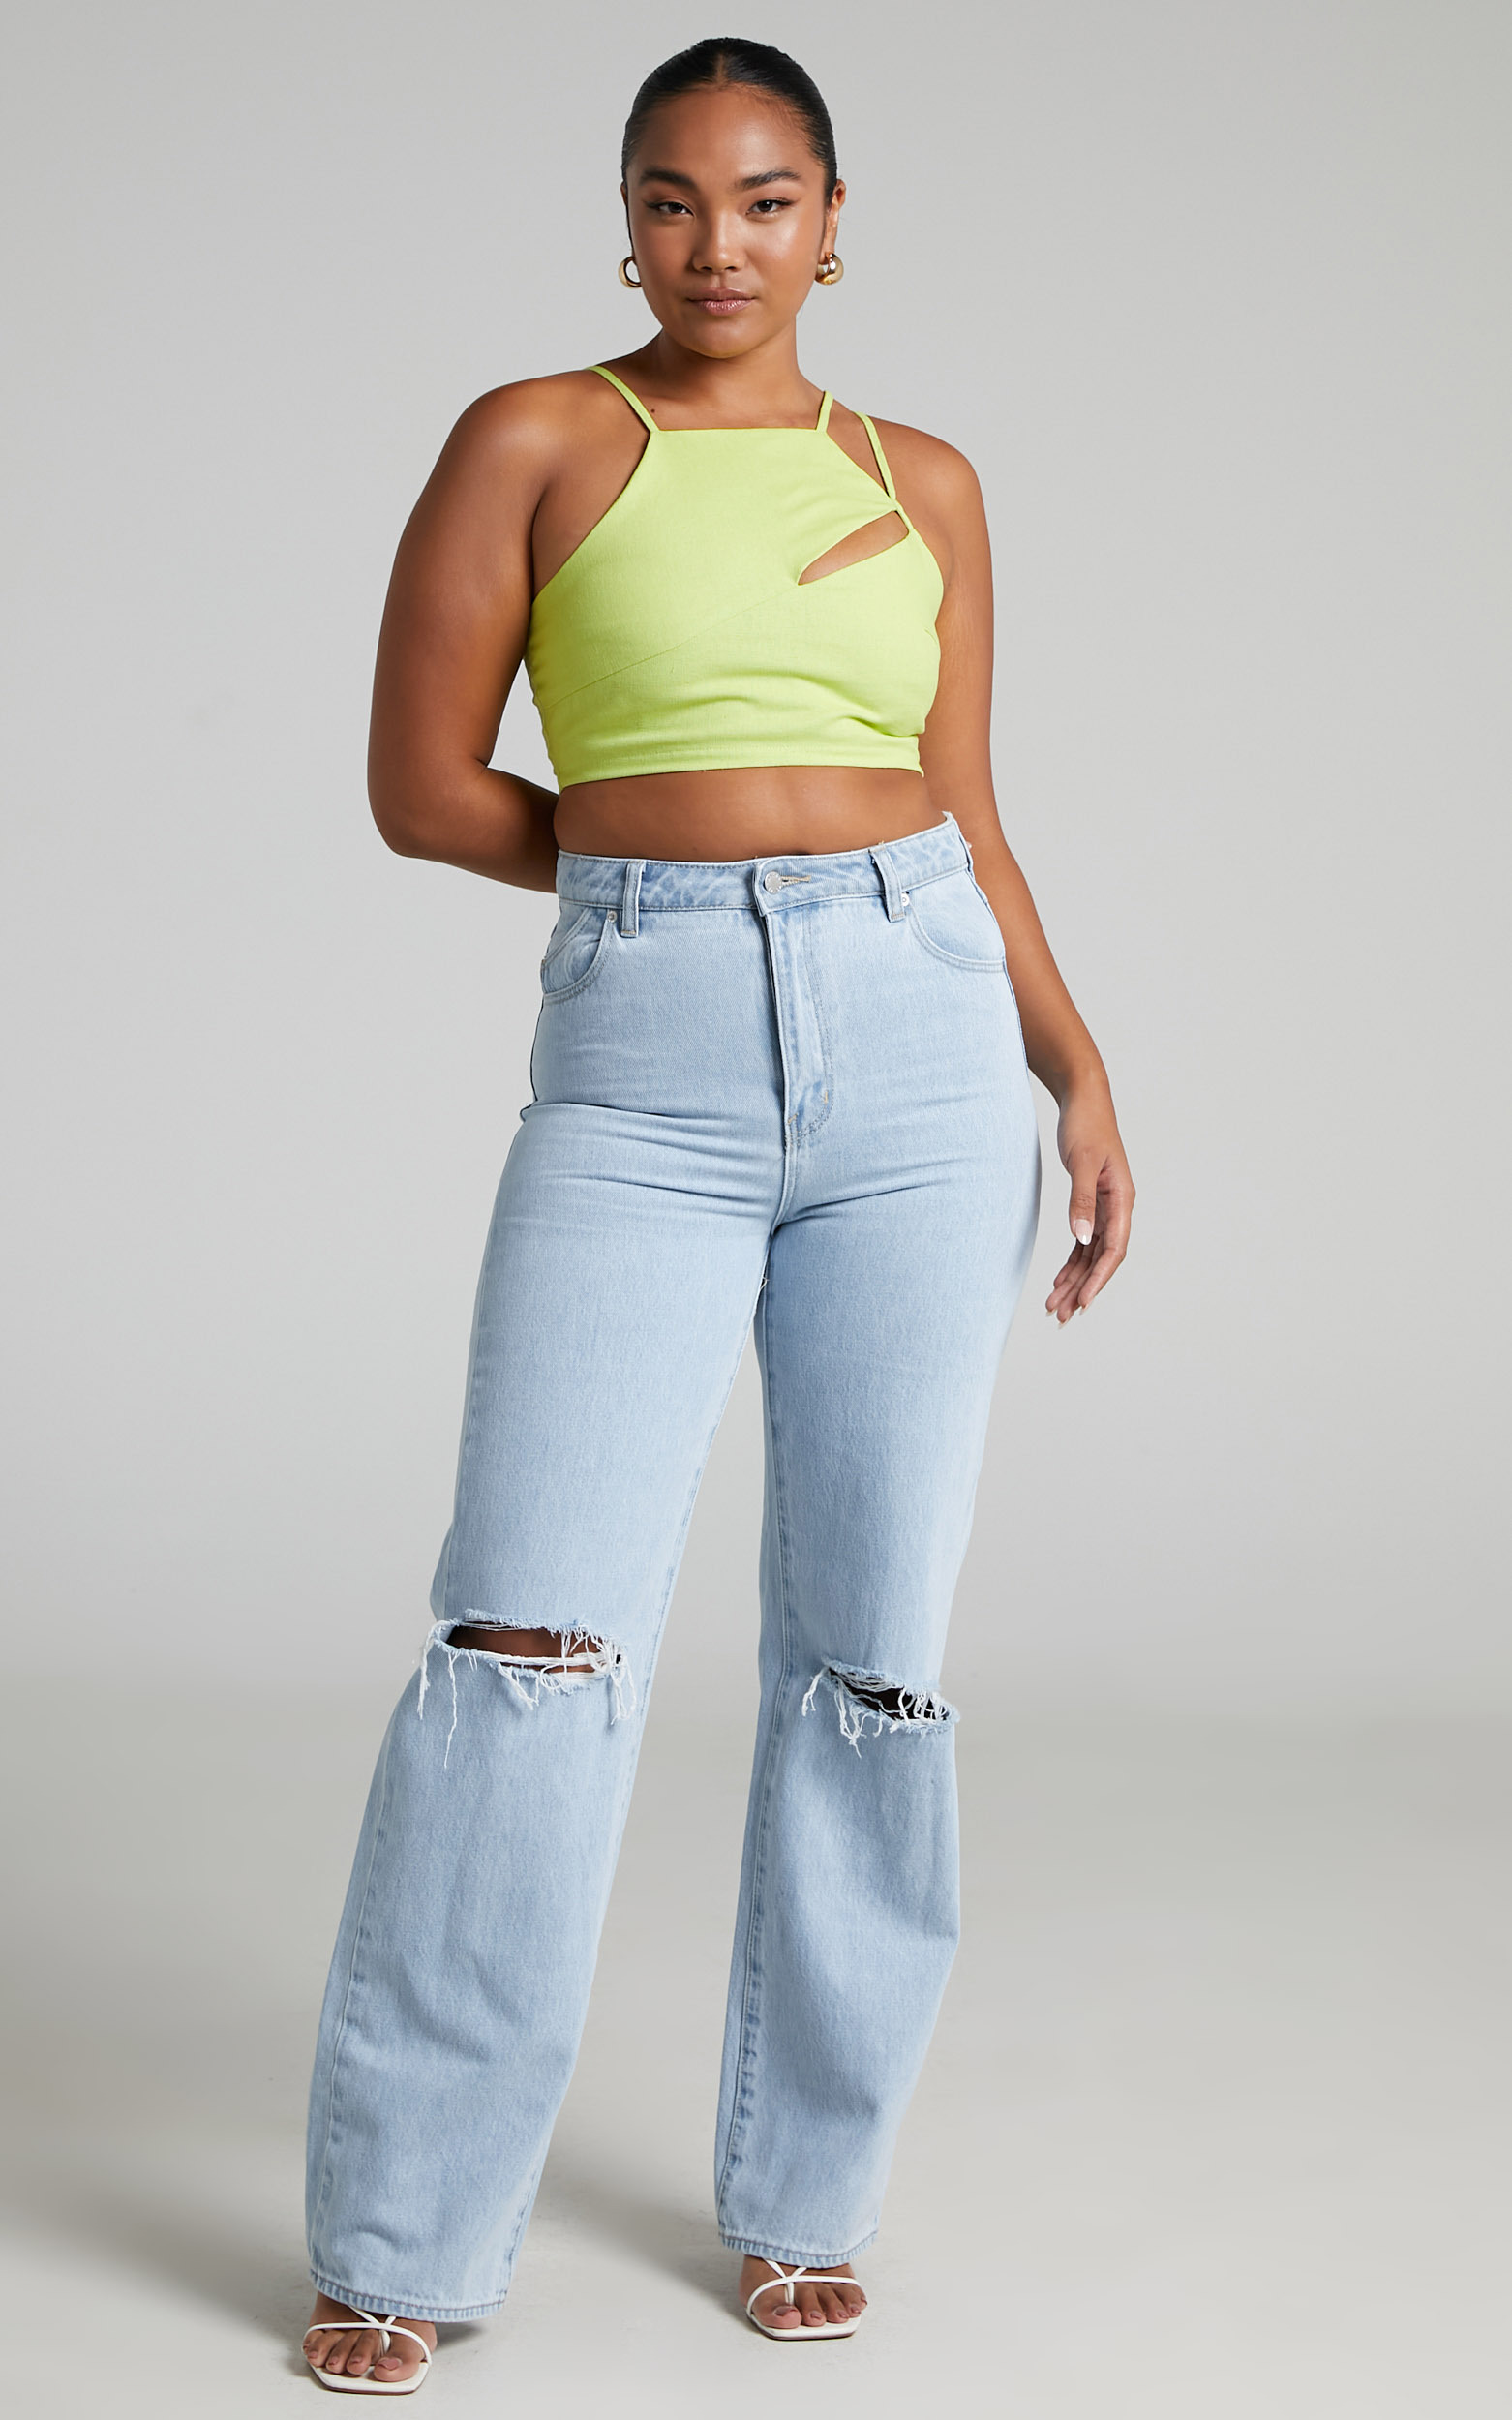 Patchico Split Bust Crop Top in Lime - 06, GRN2, hi-res image number null